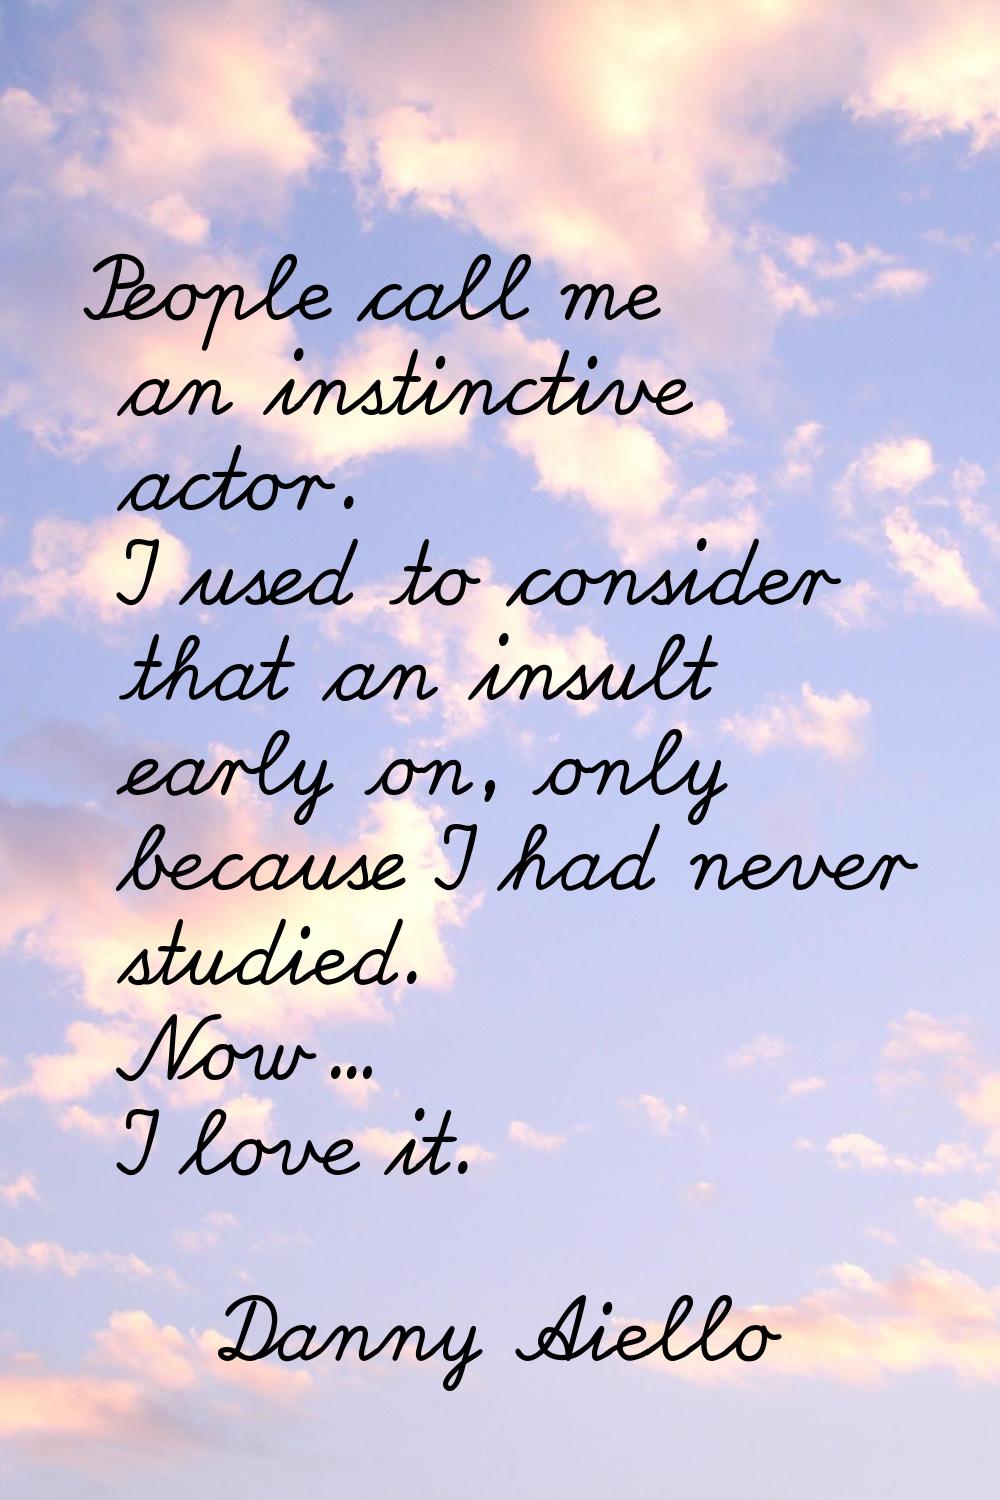 People call me an instinctive actor. I used to consider that an insult early on, only because I had